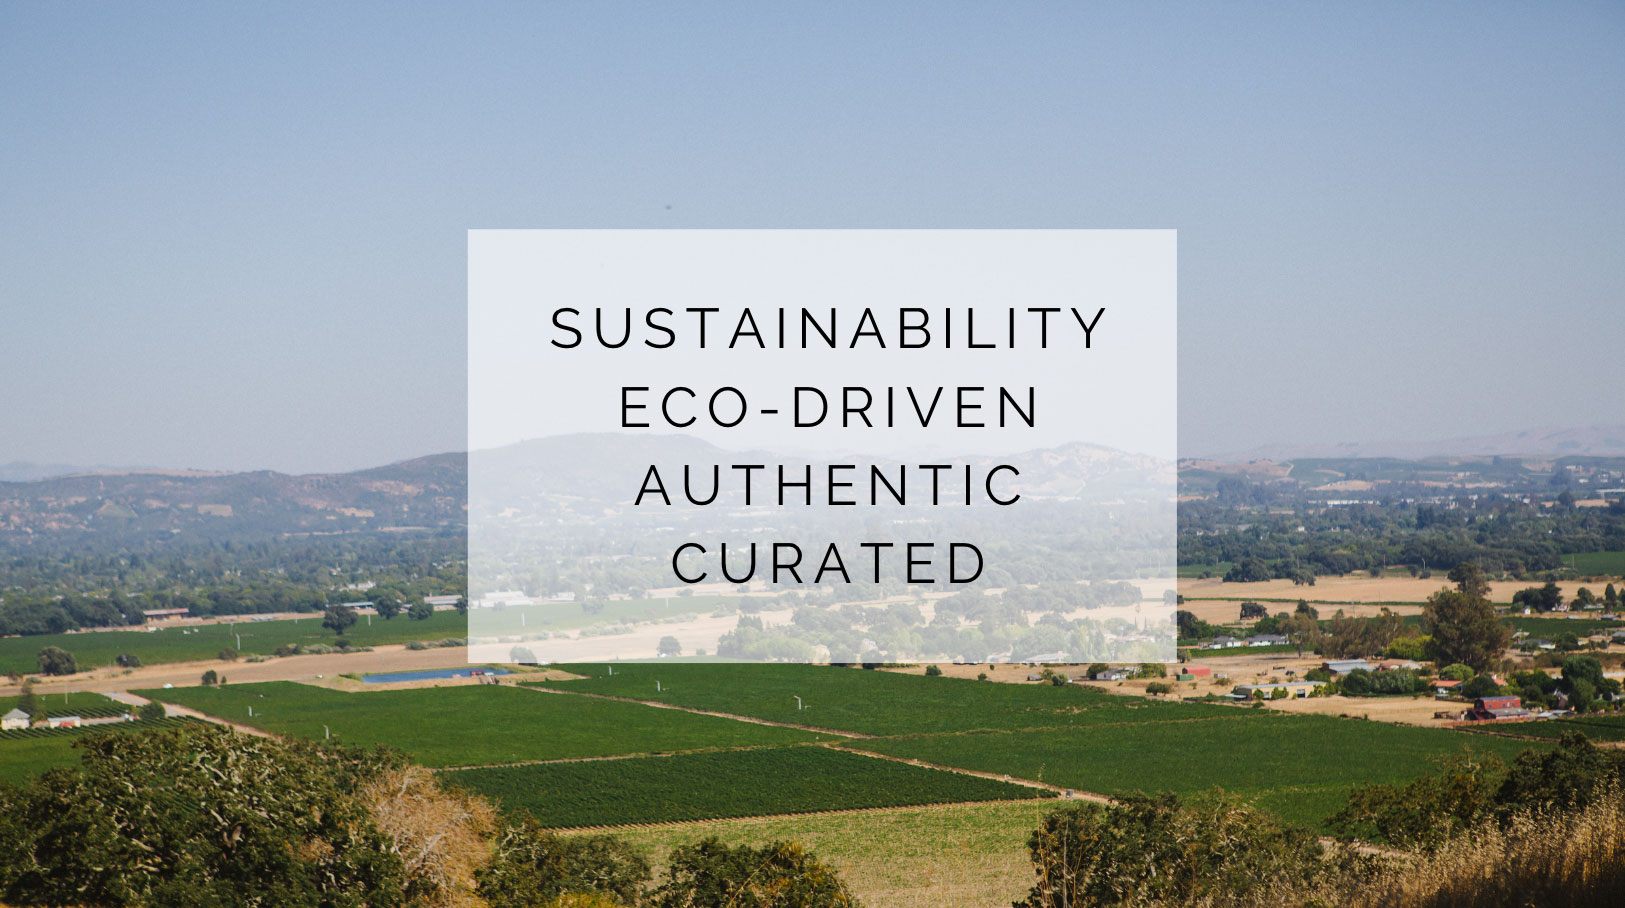 Sustainability, eco-driven, authentic, curated